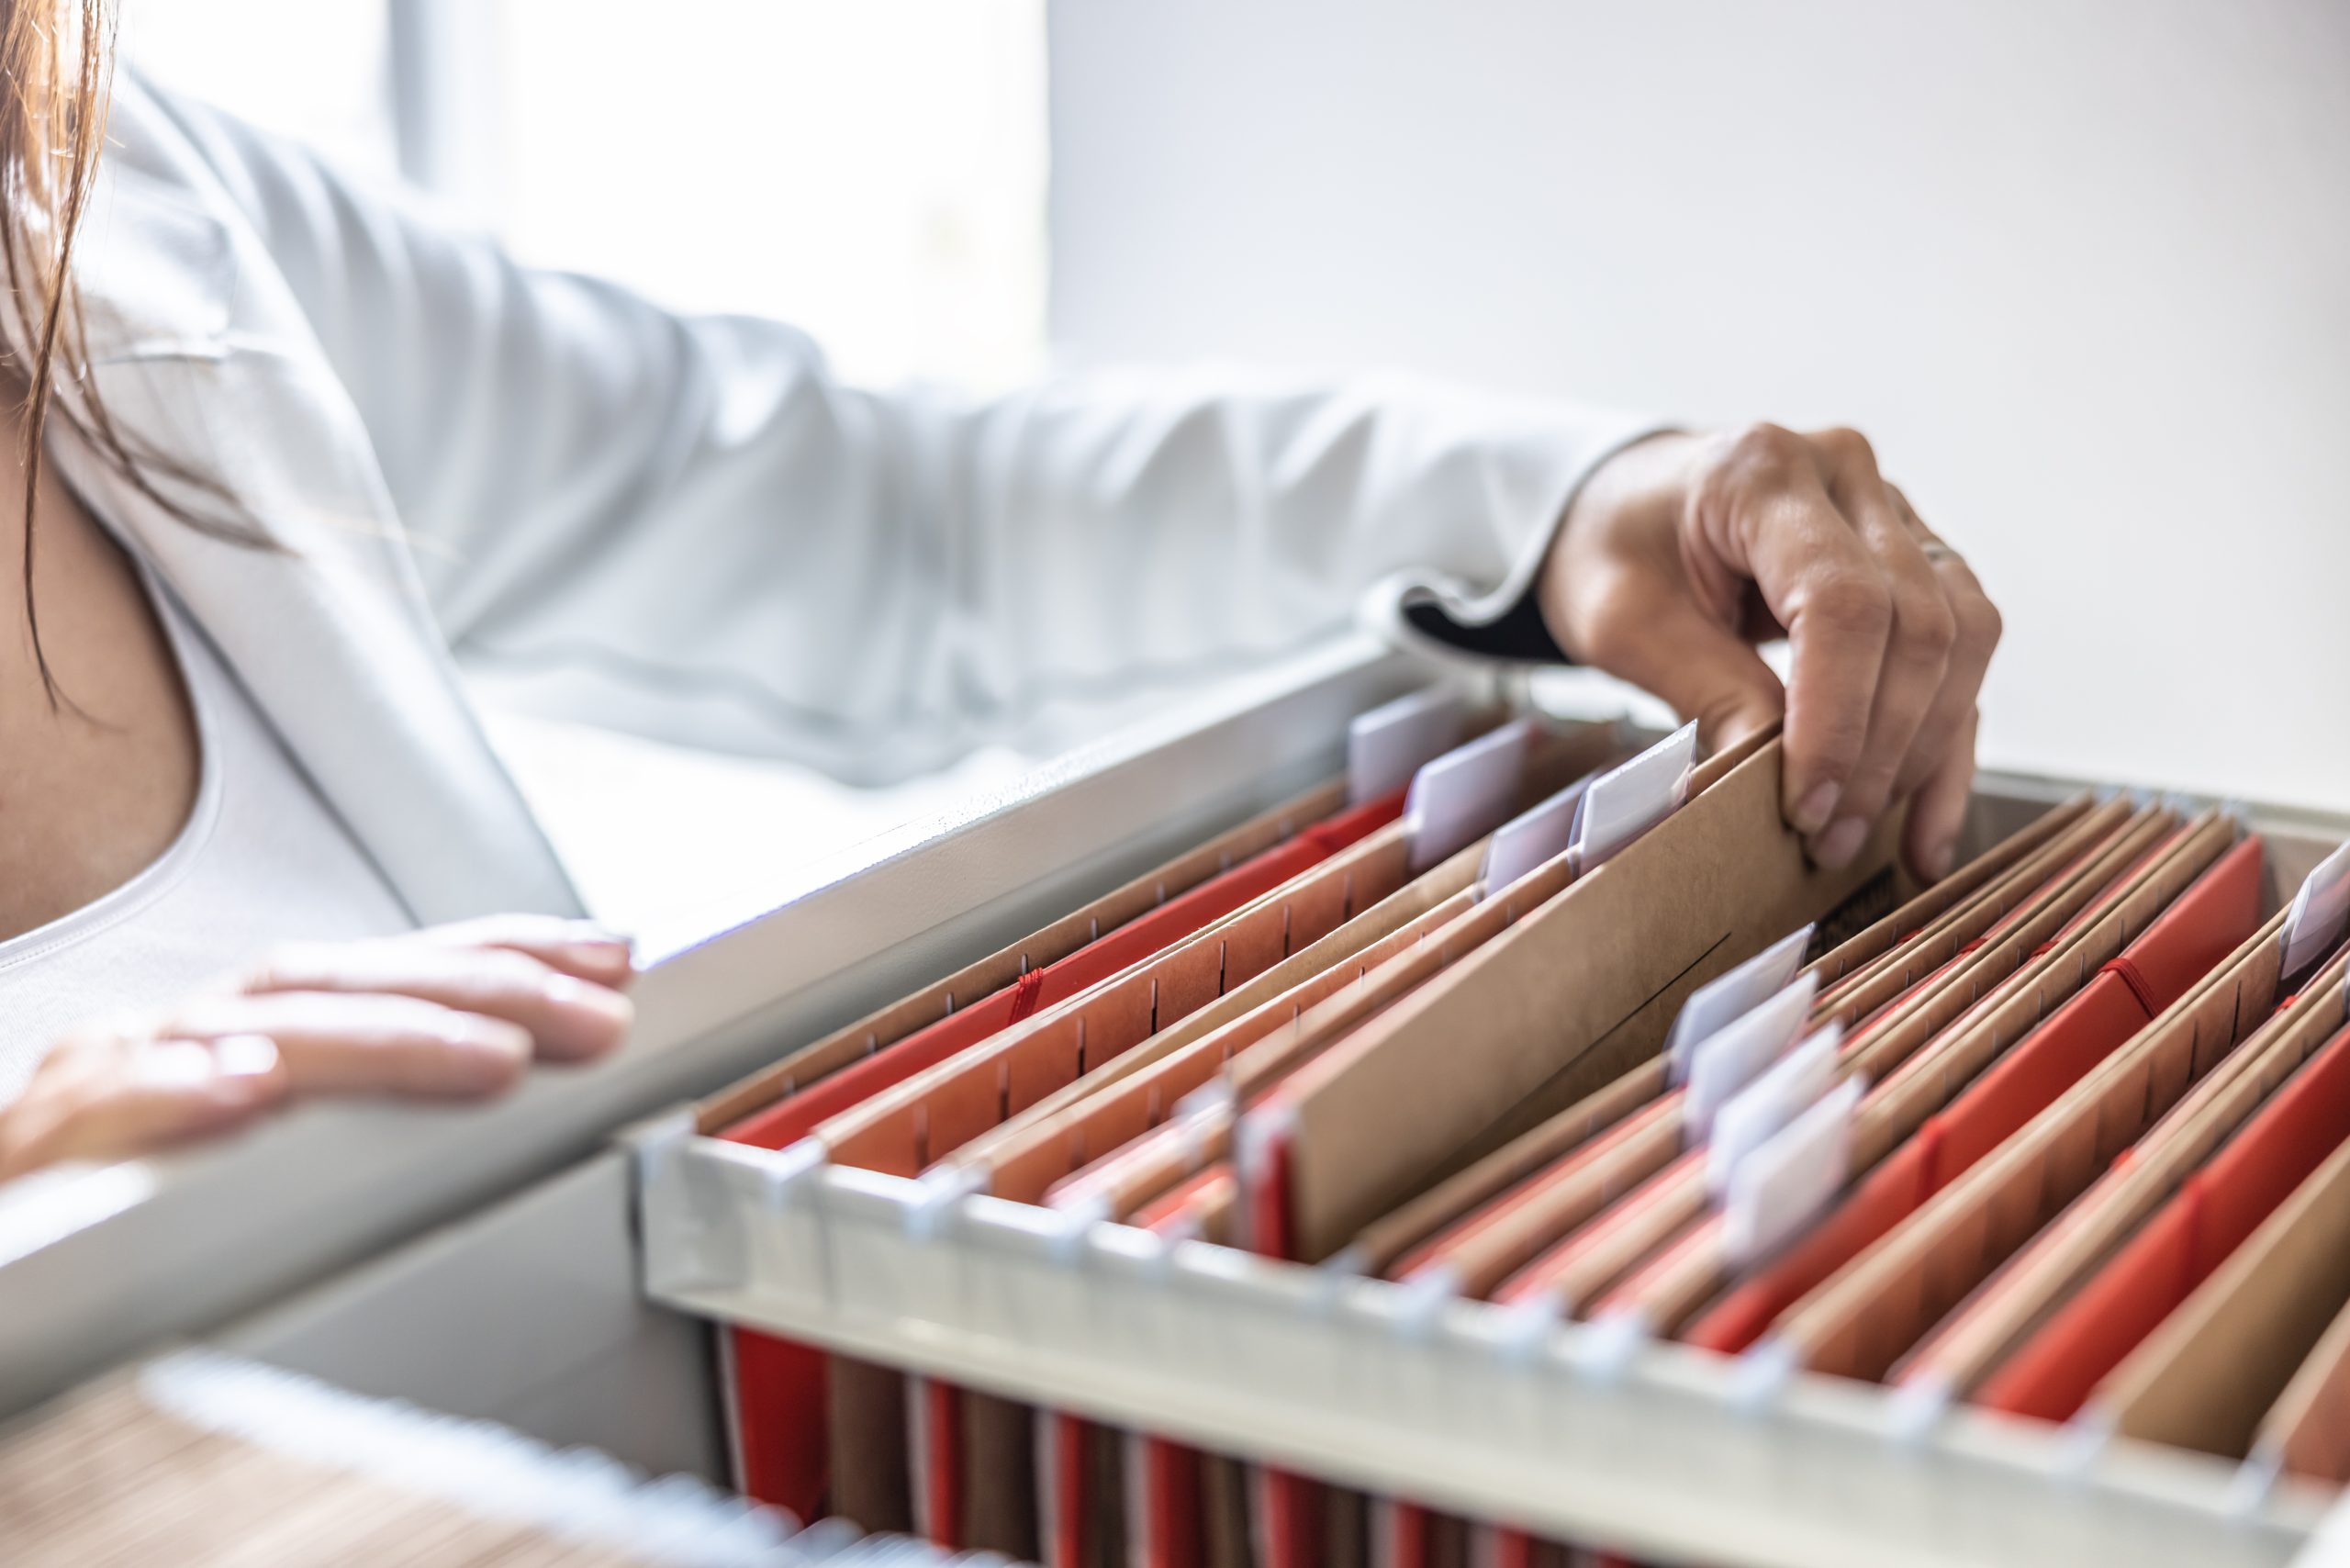 Closeup view of a medical practitioner sorting through files.